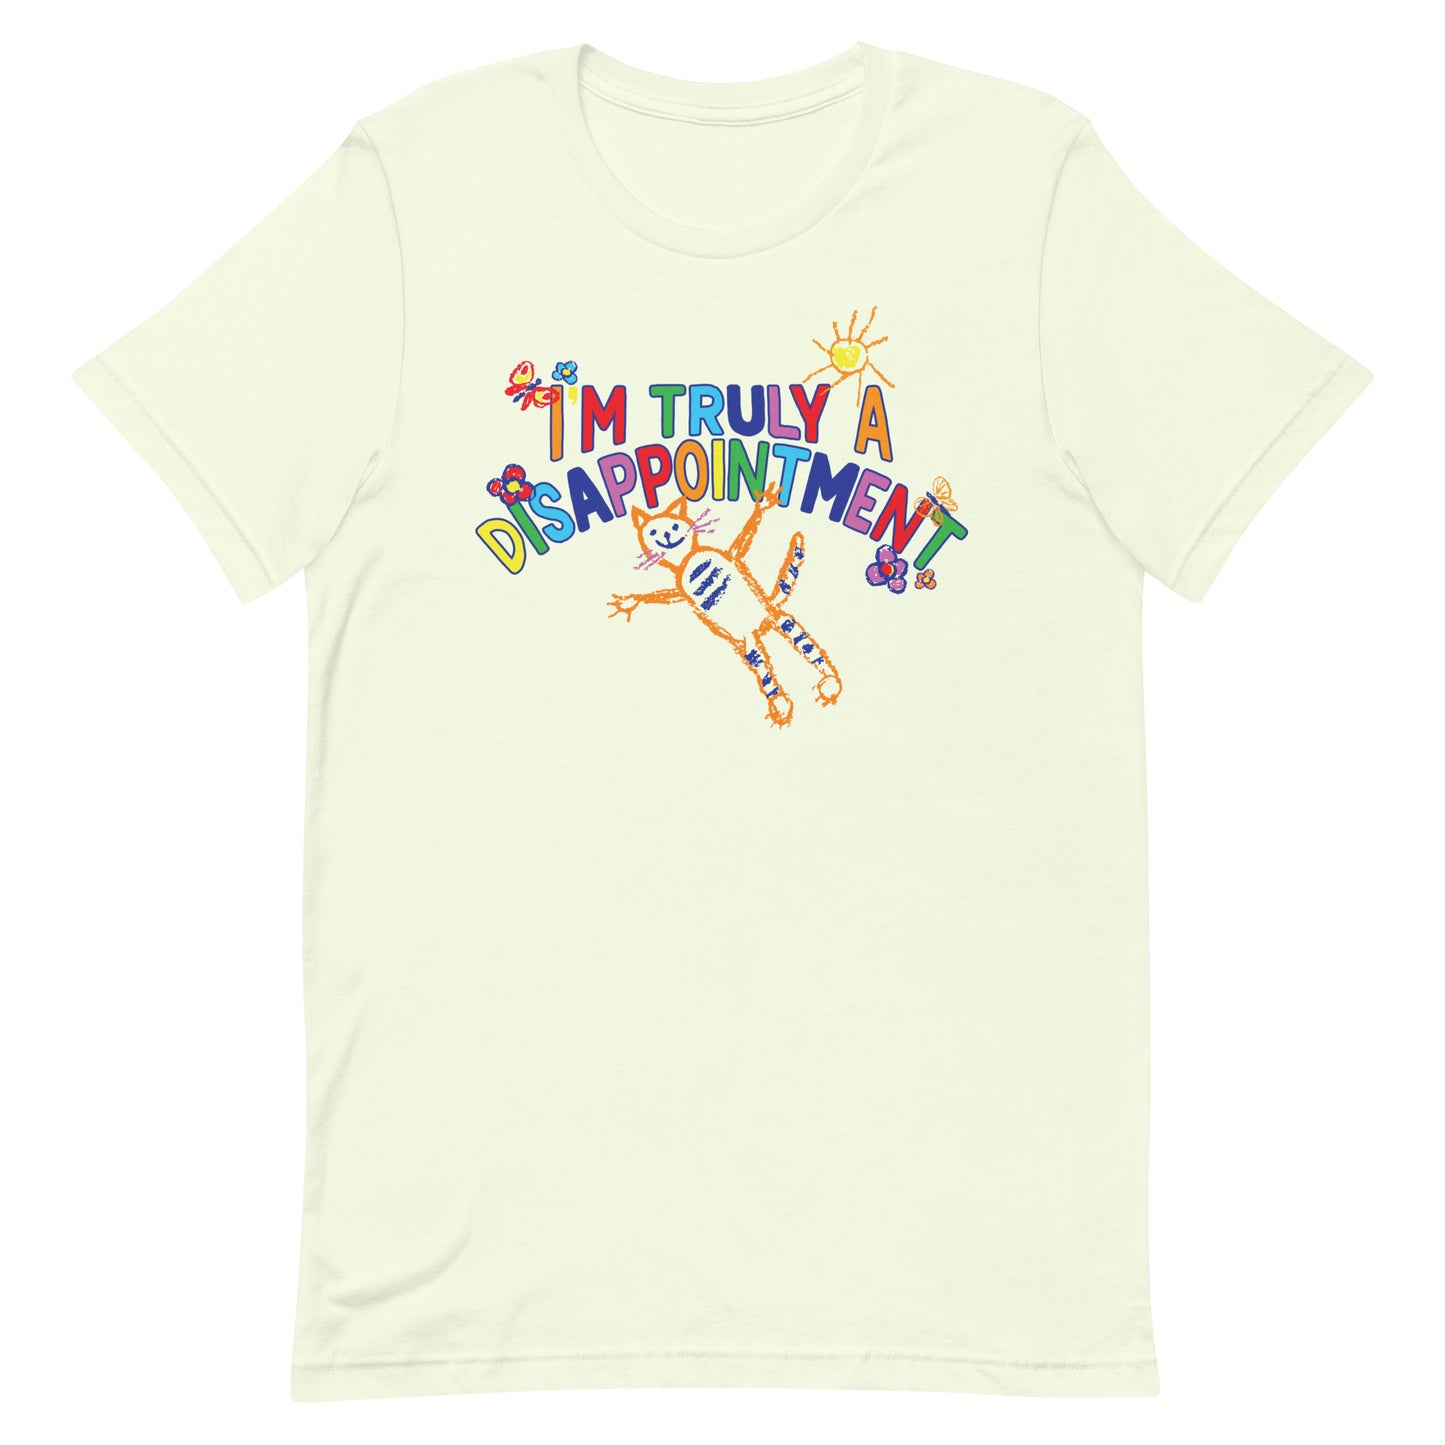 I'm Truly a Disappointment Unisex t-shirt